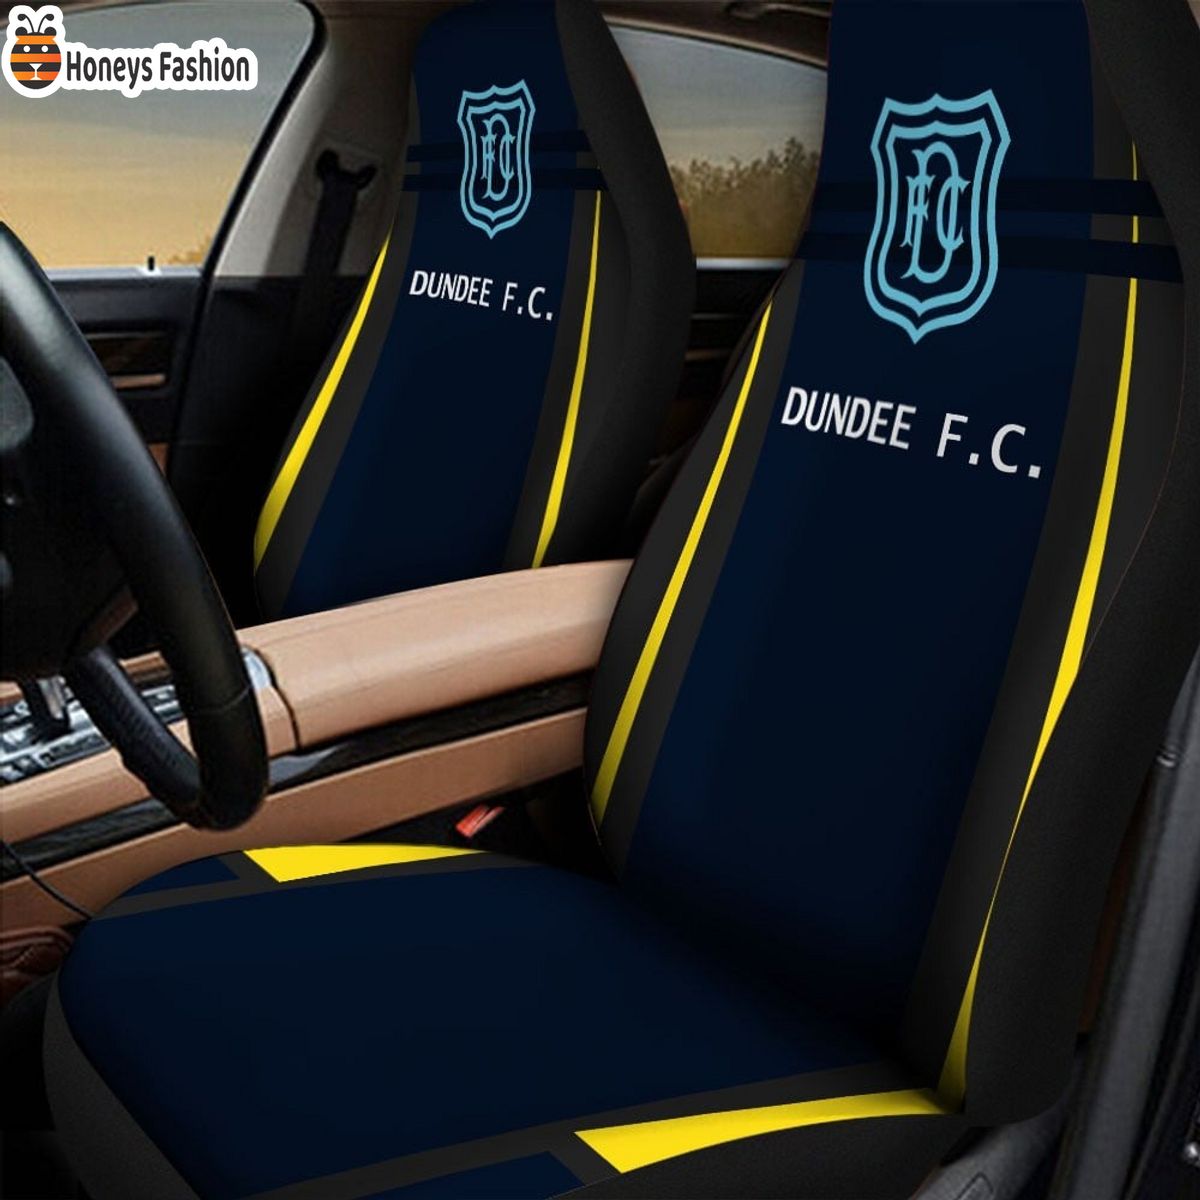 Dundee F.C. car seat cover